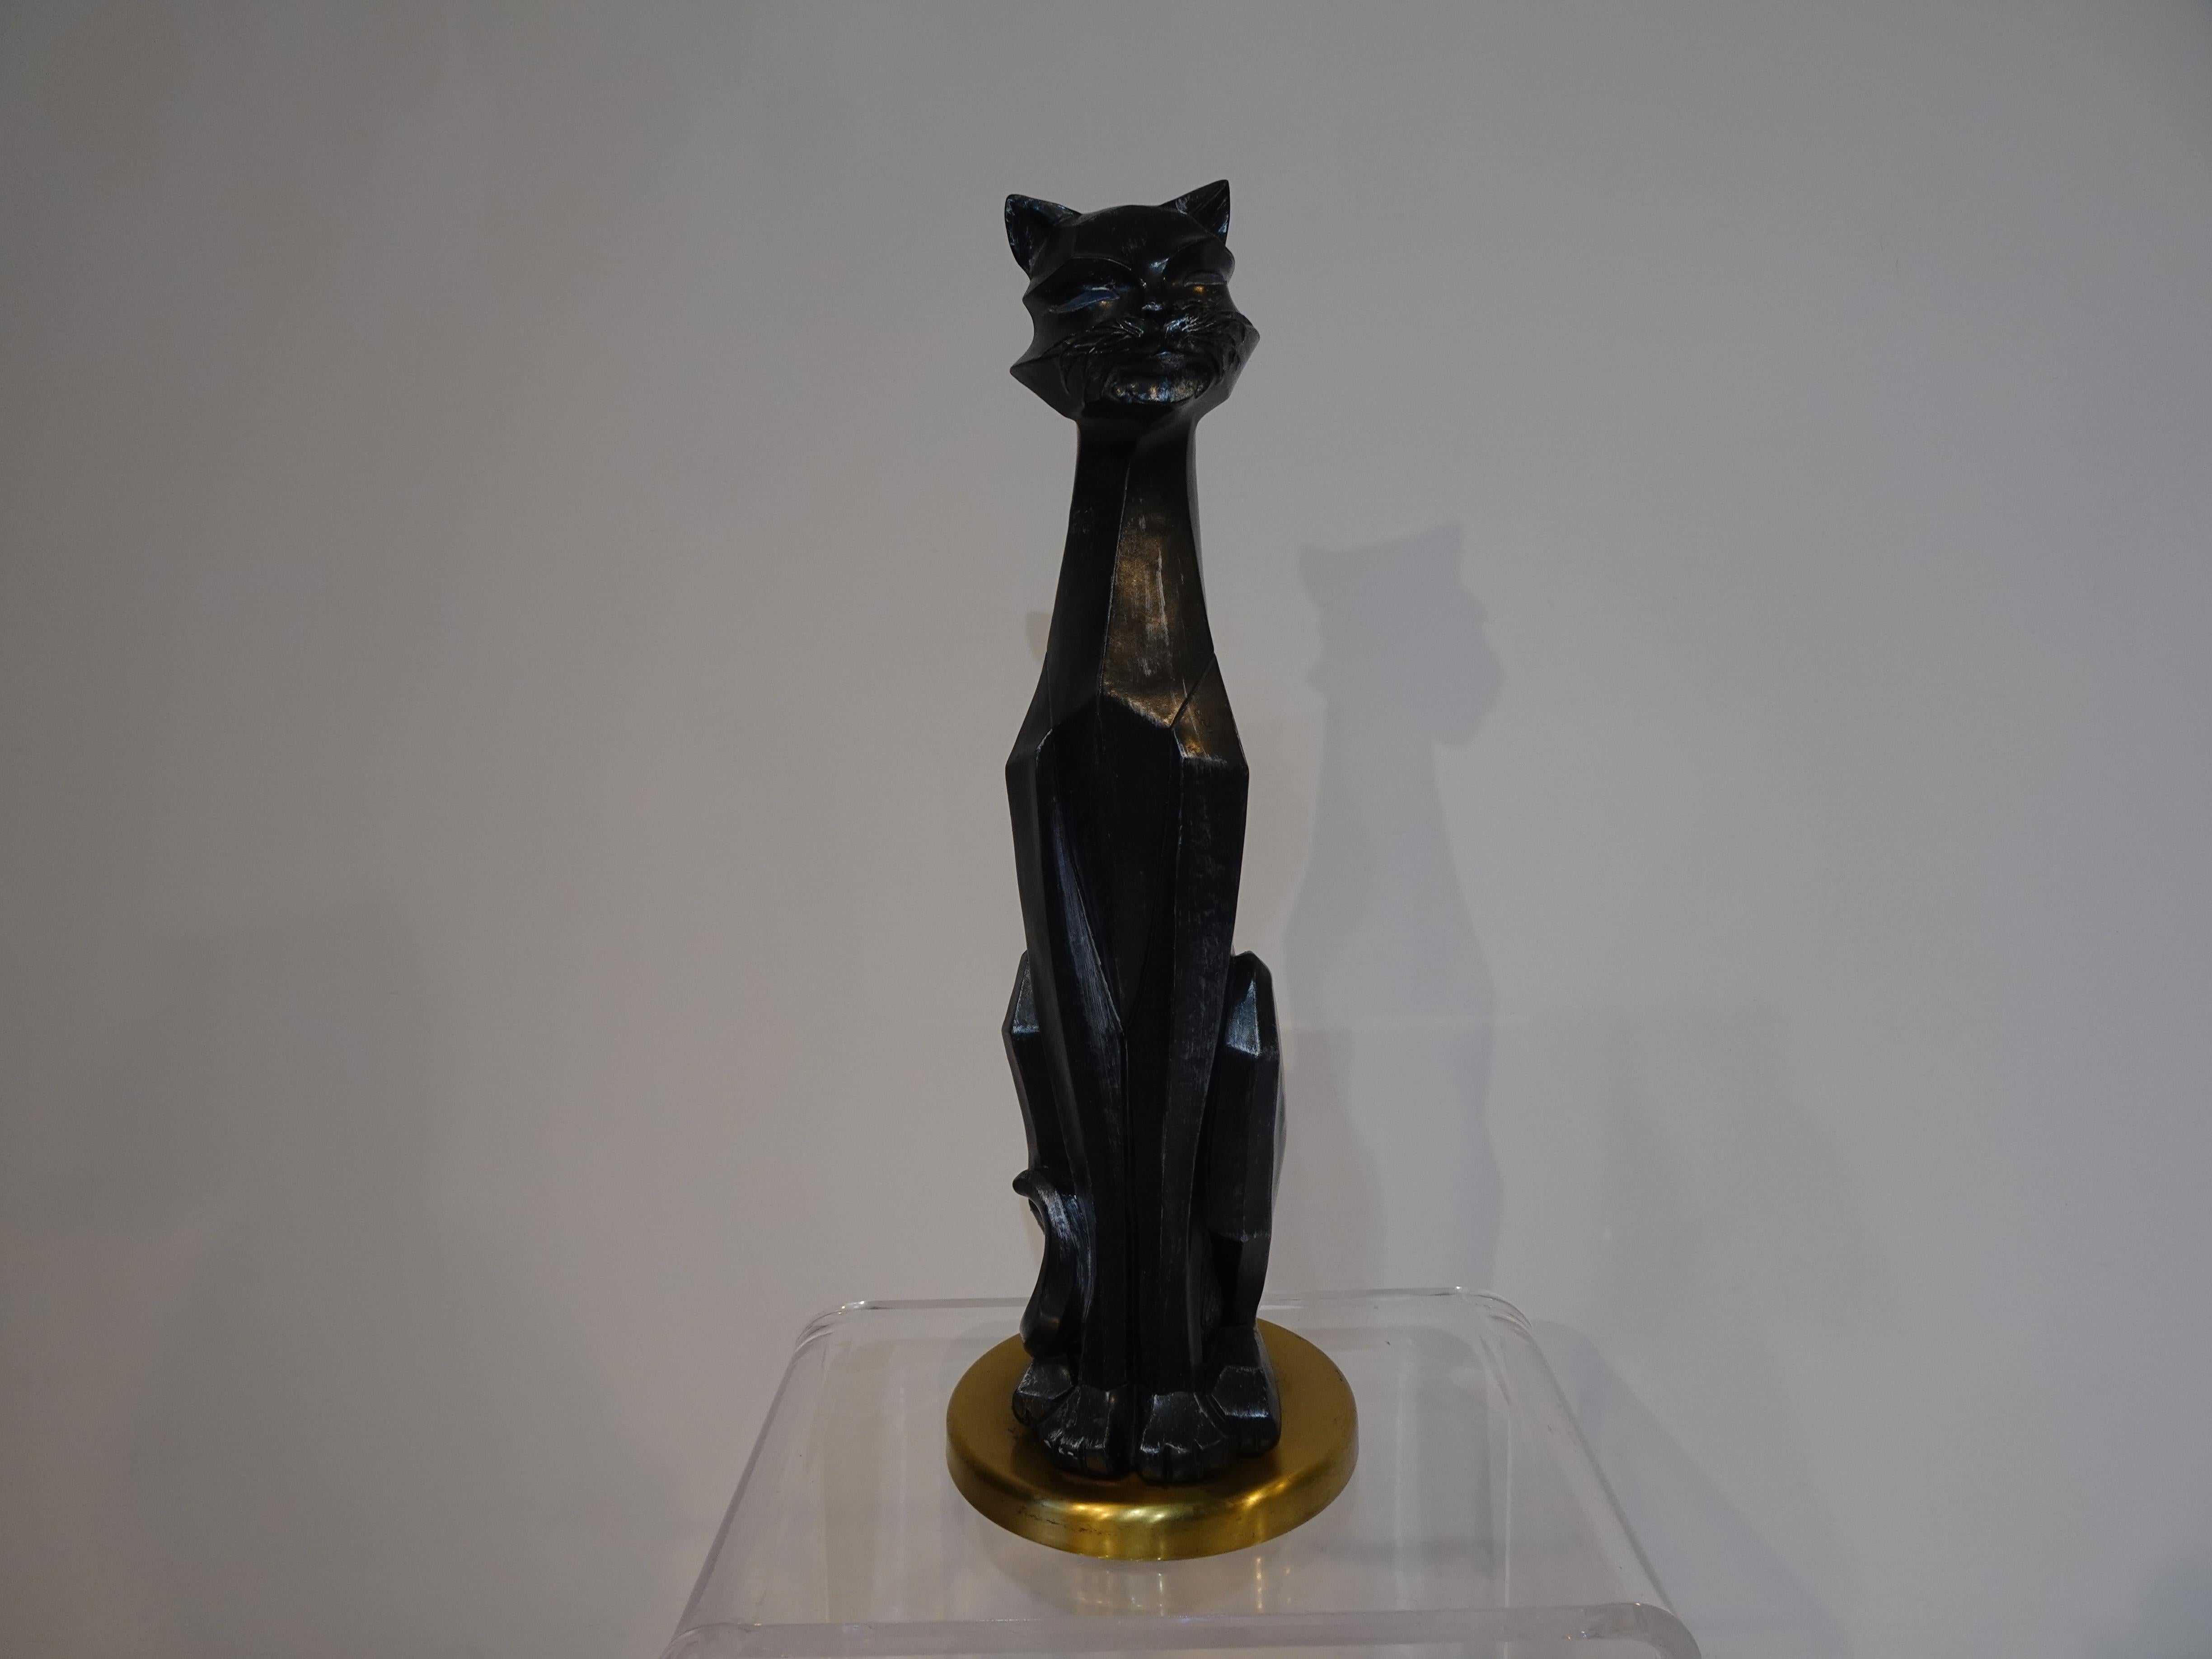 A large cat sculpture sitting on a round satin brass base, the figure is done in a cubist angler style in a mat charcoal tone cast material with brush stroked details to the body. A piece that has personality and would fit in any interior, Mid